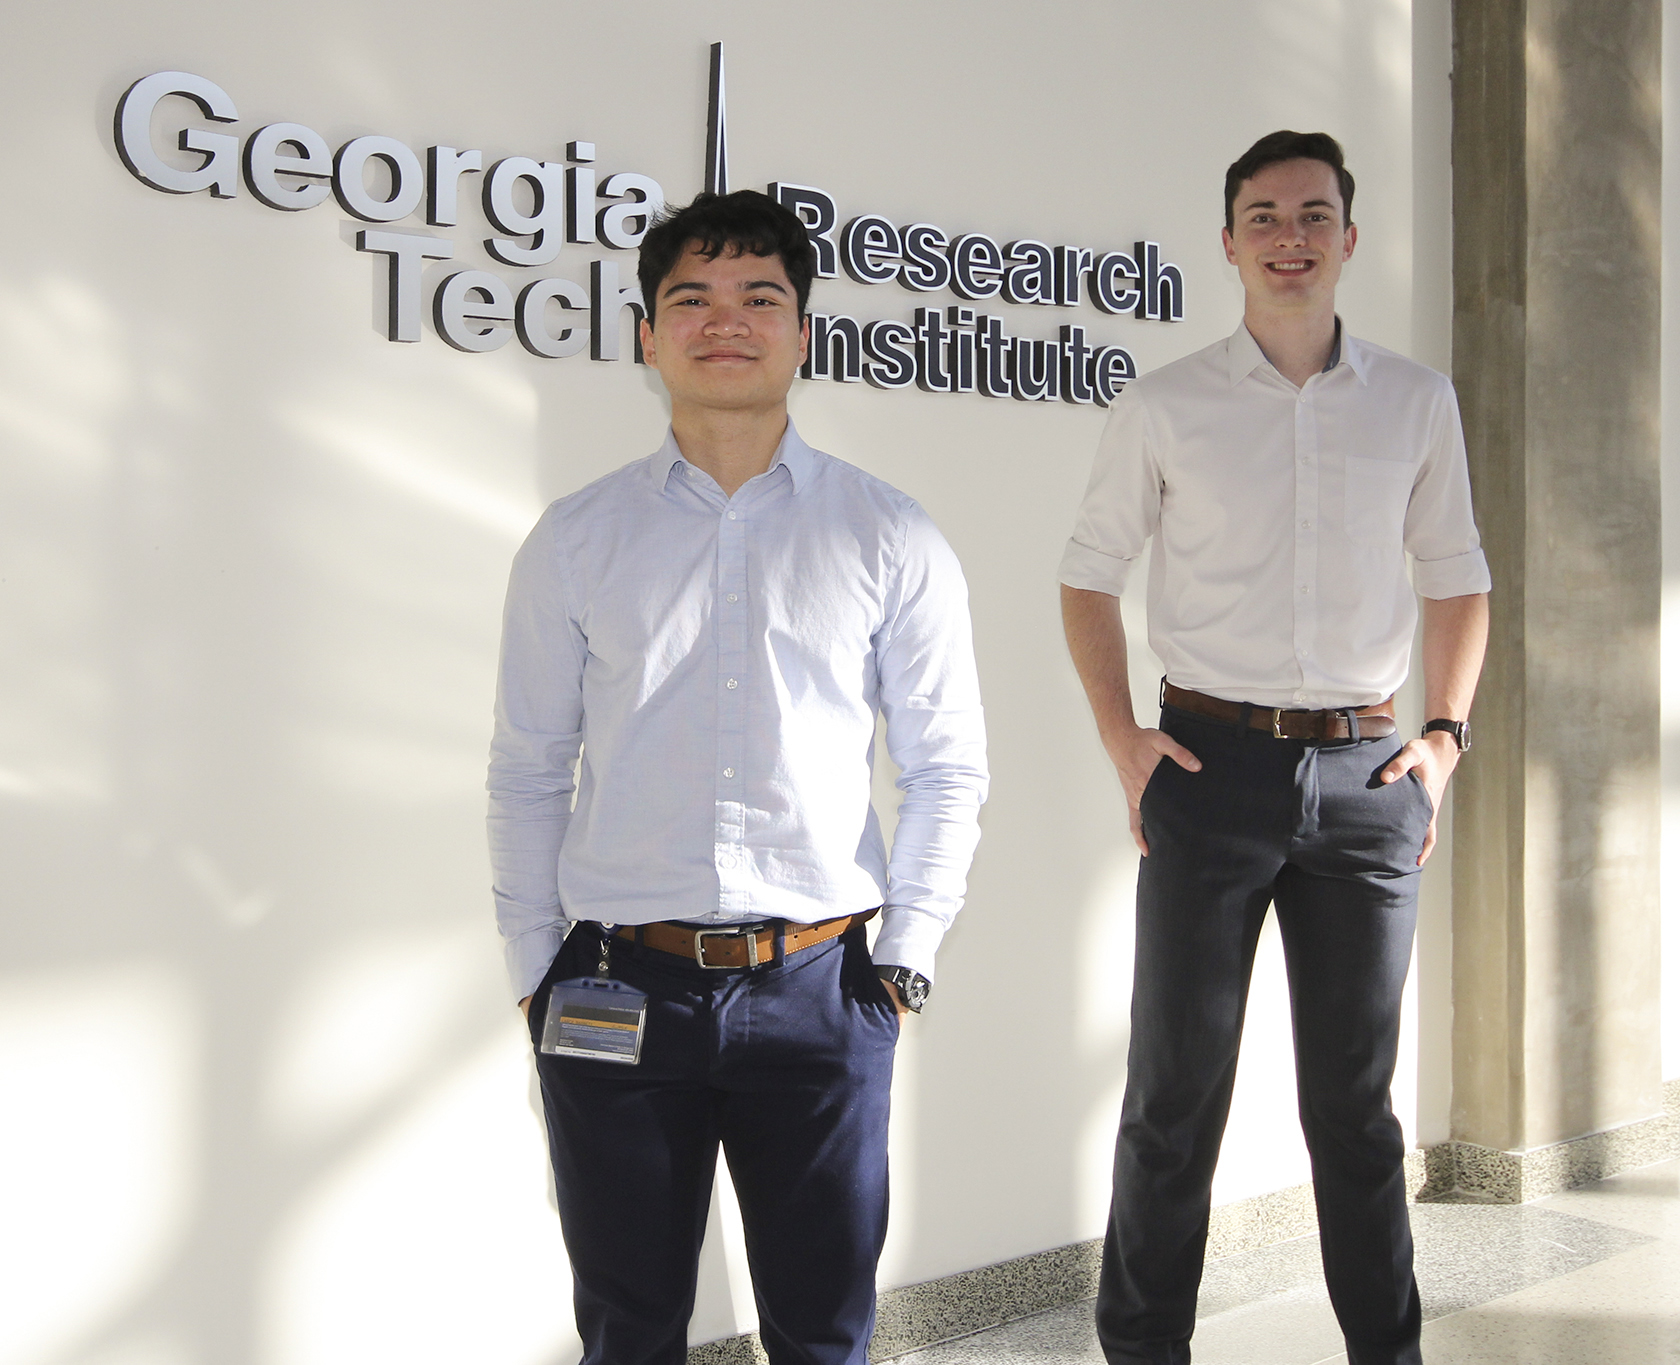 Lance Barrett (left) and Ryan Giometti (right) are the first R. Harold and Patsy Harrison Student Interns in the Abit Massey Student Internship Program at the Georgia Tech Research Institute.